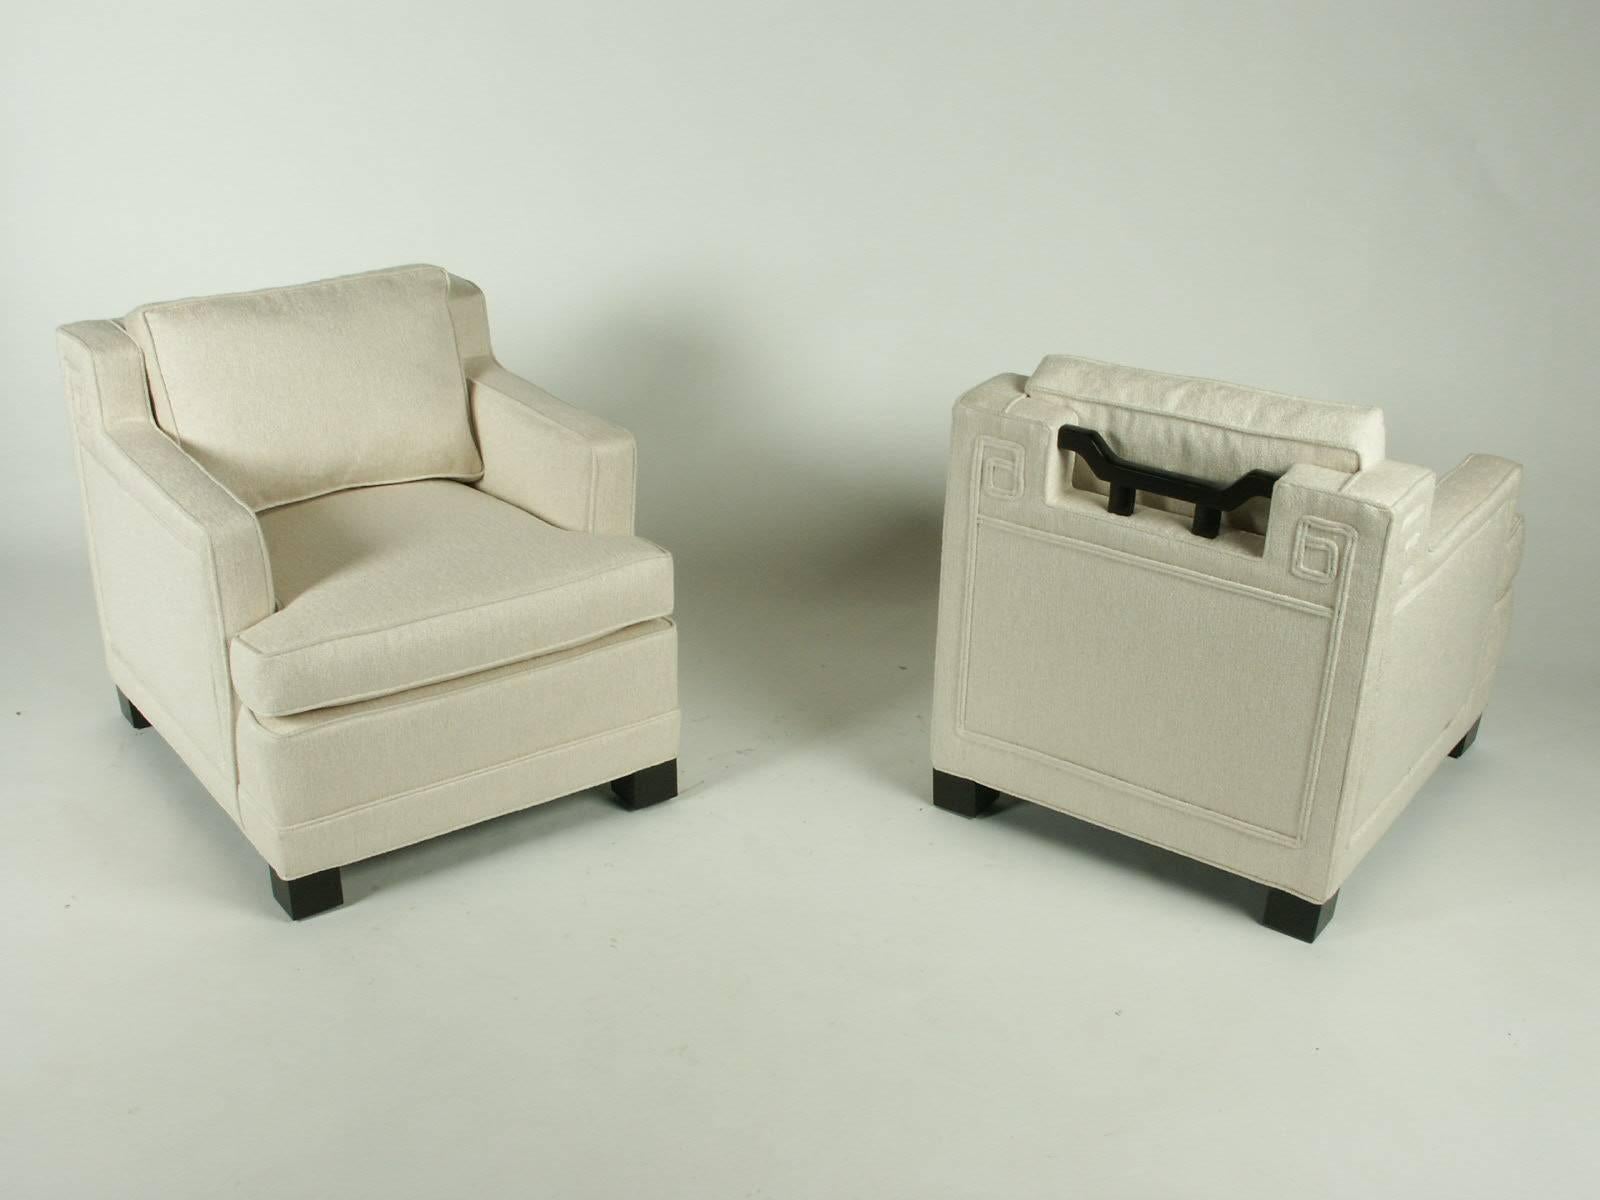 Hollywood Regency Pair of Mid-Century Modern Baker Far East Club Chairs Designed by Winsor White